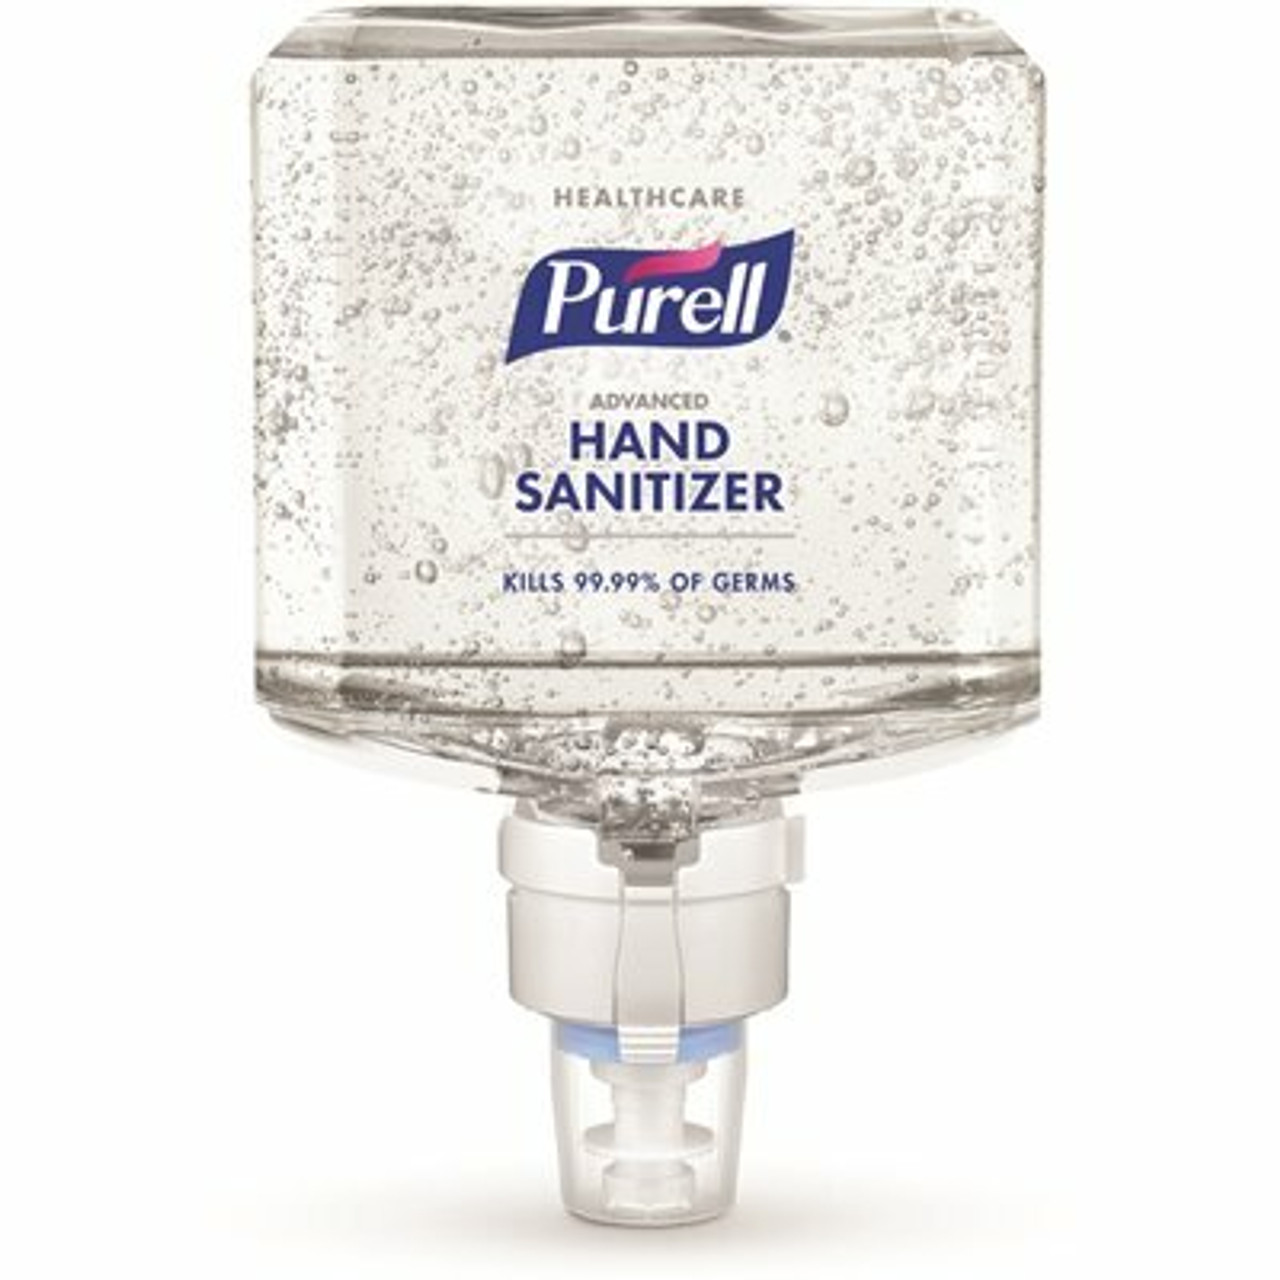 Purell Healthcare Advanced Hand Sanitizer Gel, 1200 Ml Sanitizer Refill For Es8 Touch-Free Dispenser (2-Pack Per Case)